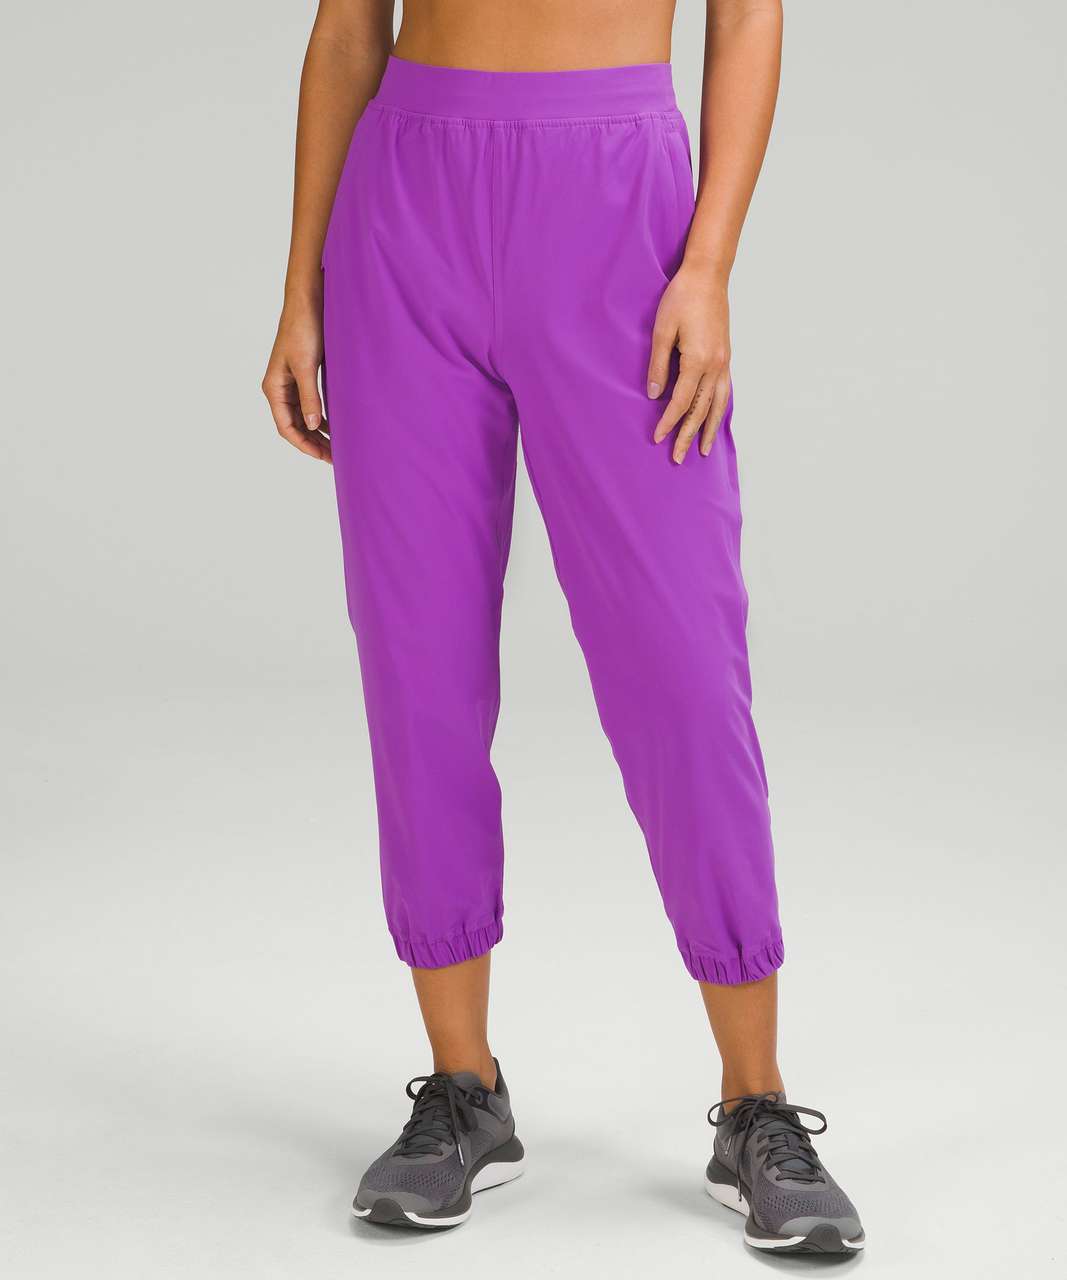 Lululemon Adapted State High-Rise Cropped Jogger 23" - Moonlit Magenta